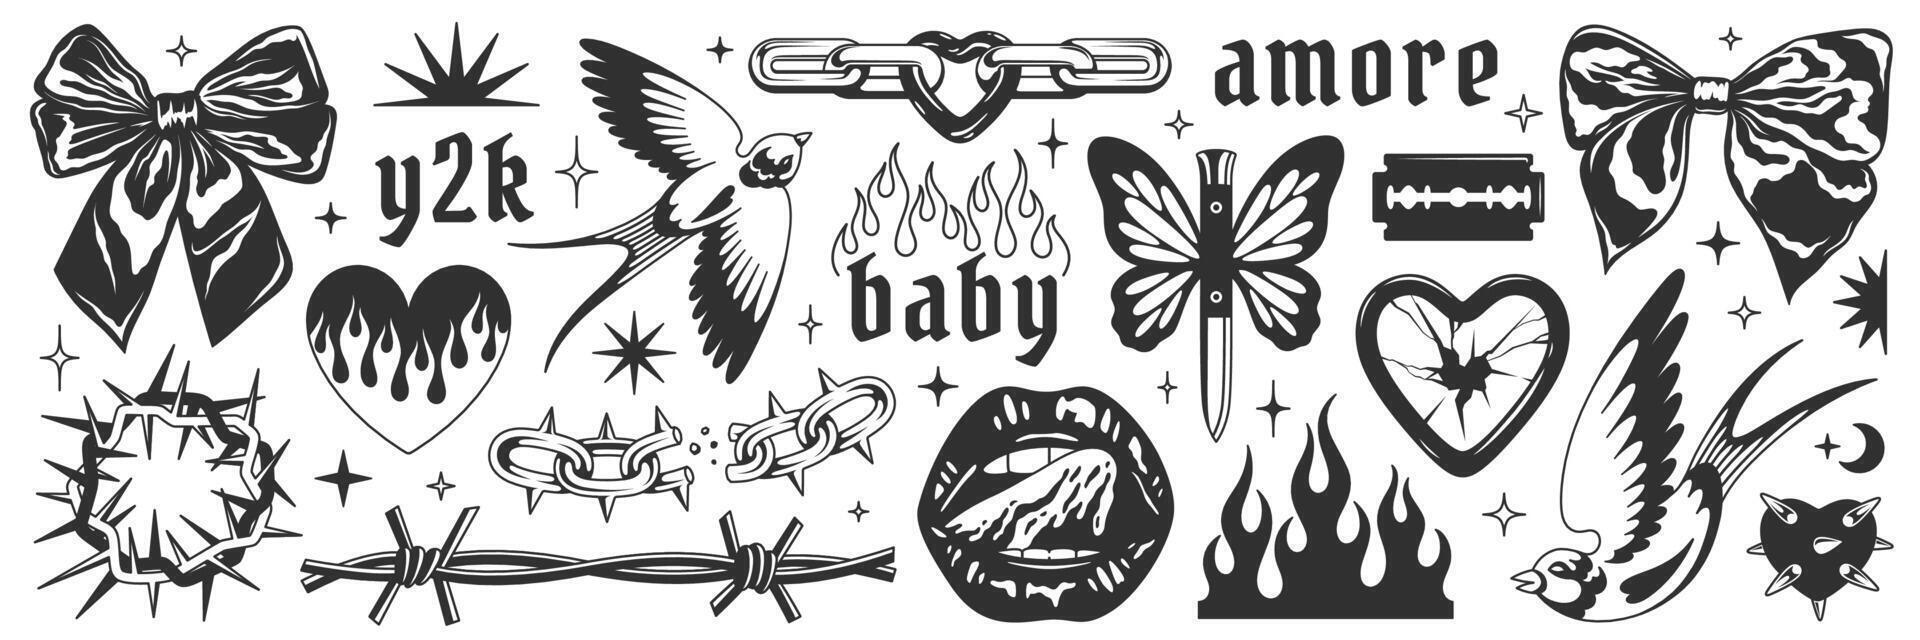 Y2k symbols, goth chain, heart, flame, bow, mouth, butterfly knife, mouth, blackthorn, blade, broken mirror. Y2k aesthetic set. Tattoo art signs of 2000s style. Vector tattoo line modern stickers.